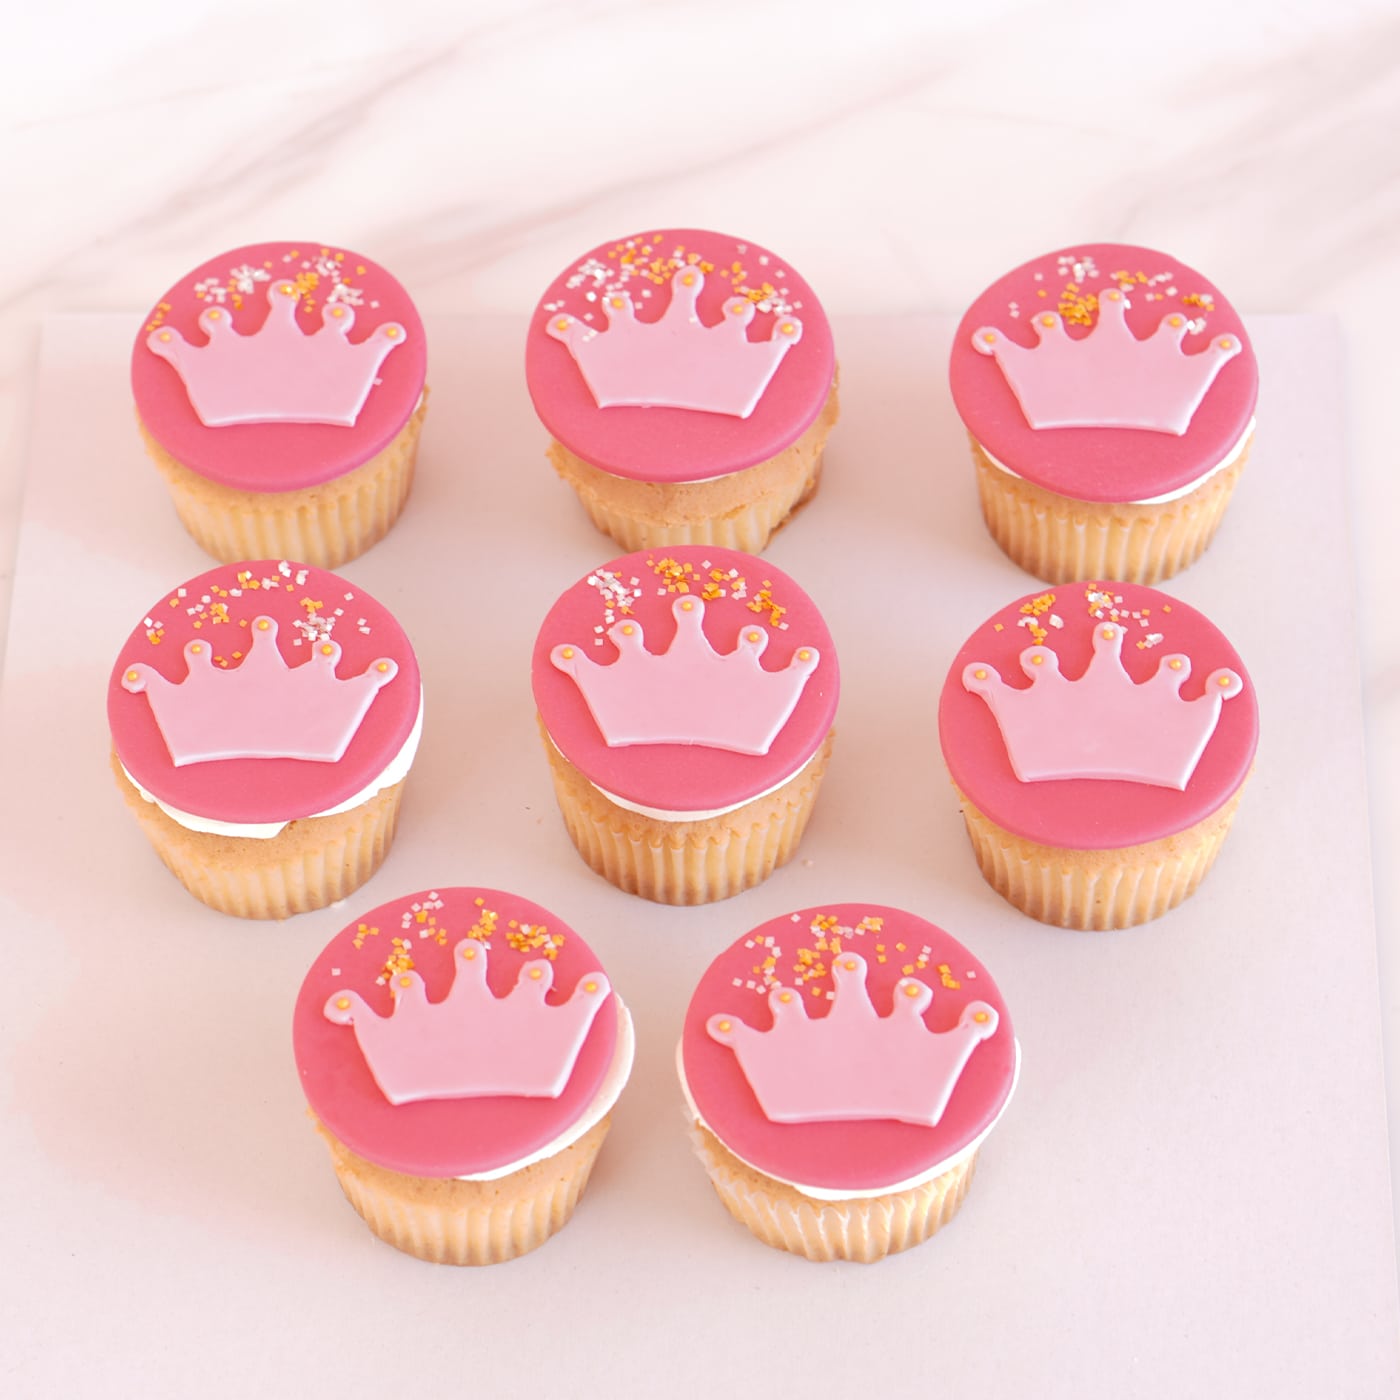 Buy Tiara Crown Girl Birthday Party Cupcake Topper, 12 Pack Princess Crown  Cupcakes Toppers, Gold Tiara Cupcake Toppers, Pink and Gold Tiara Crown  Cupcake Toppers, Gold Princess Birthday Party Decorations Online at